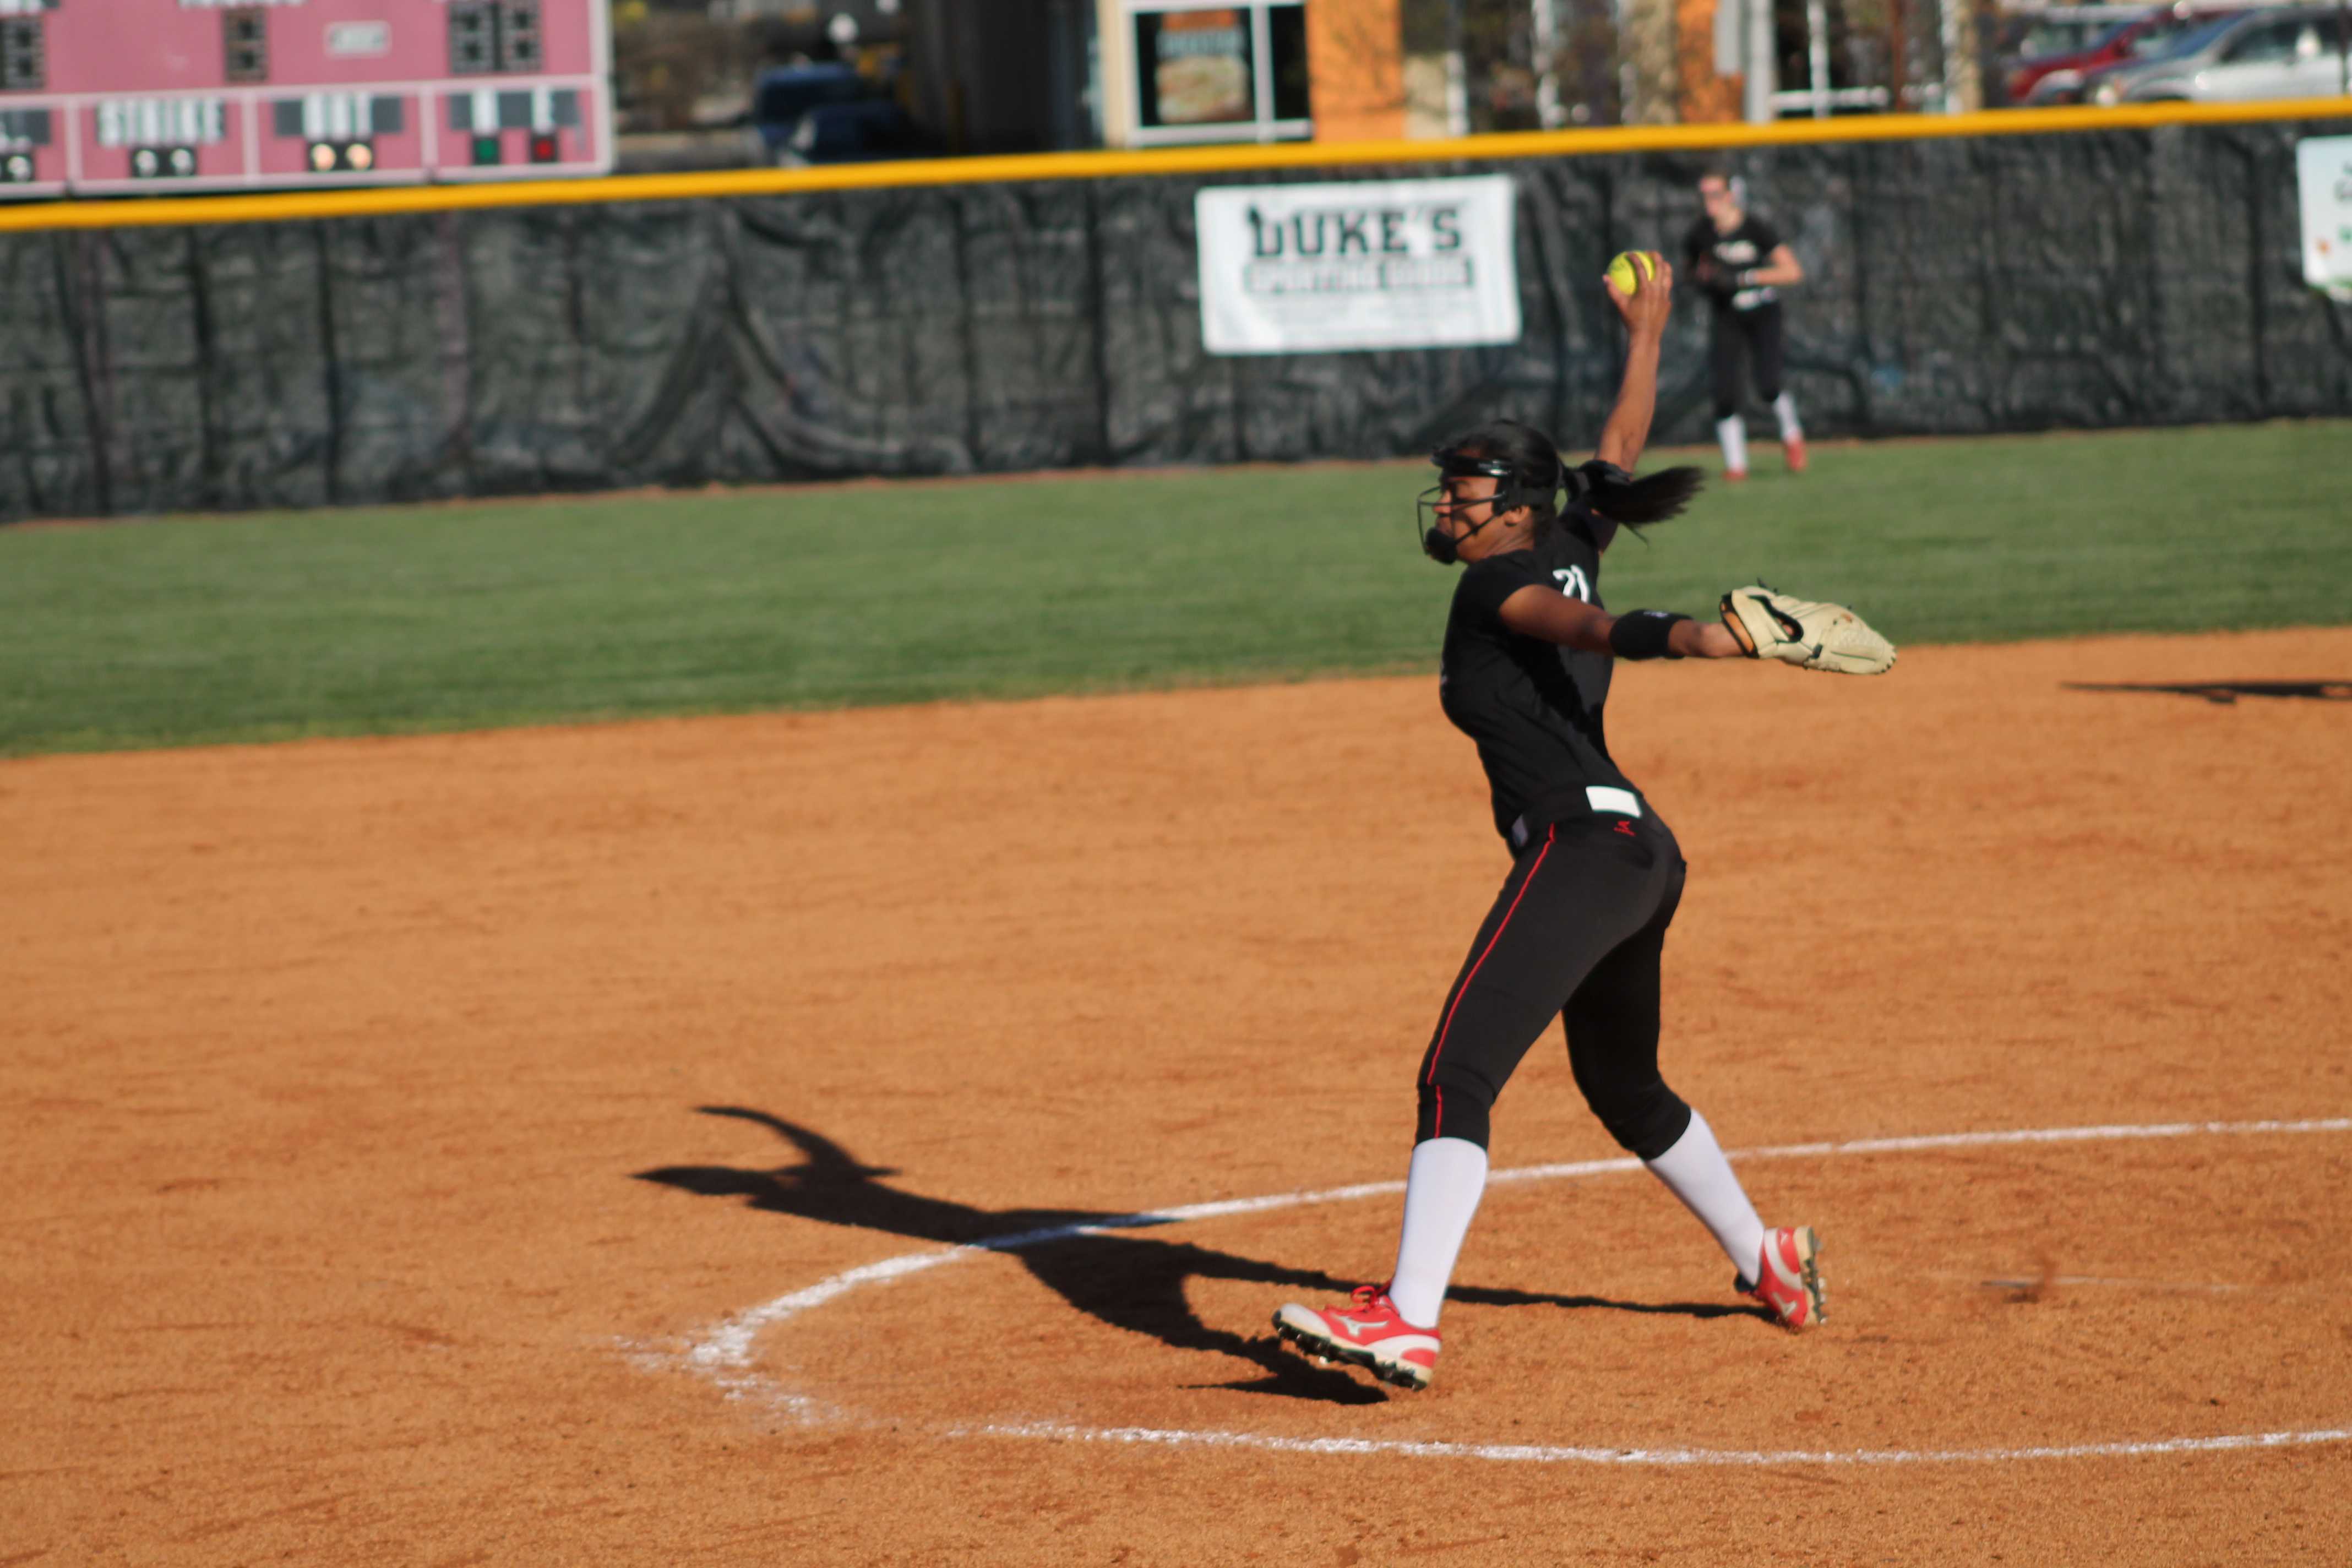 Madison Williams (12, #21) with the pitch late in Tuesdays game.